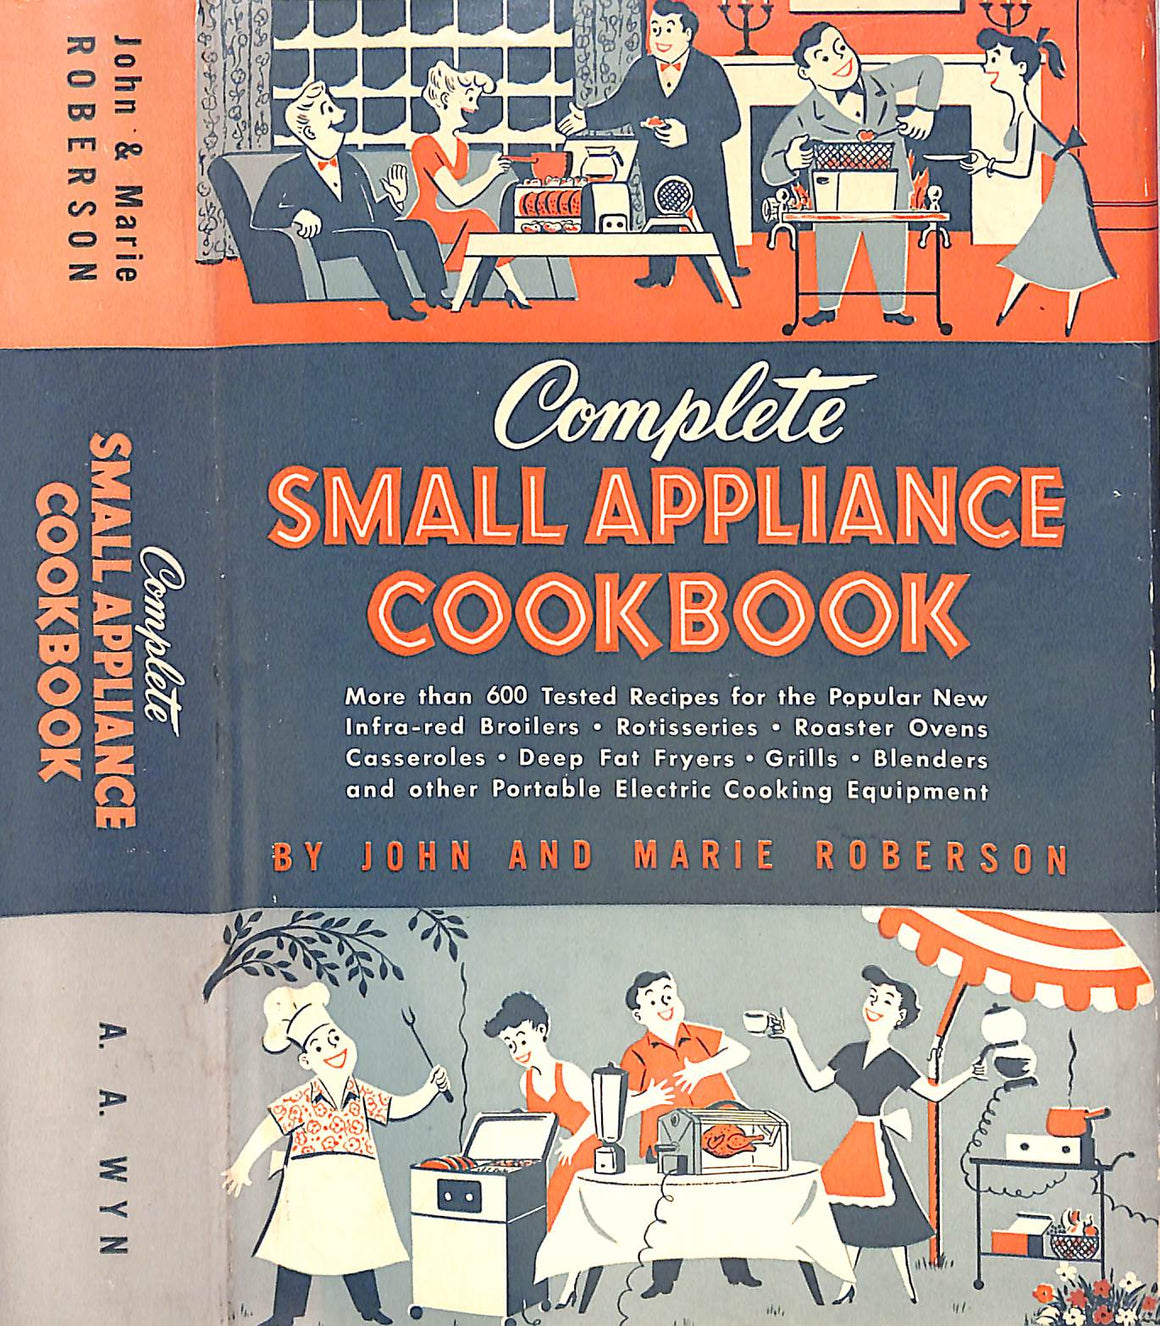 "Complete Small Appliance Cookbook" 1953 ROBERSON, John and Marie